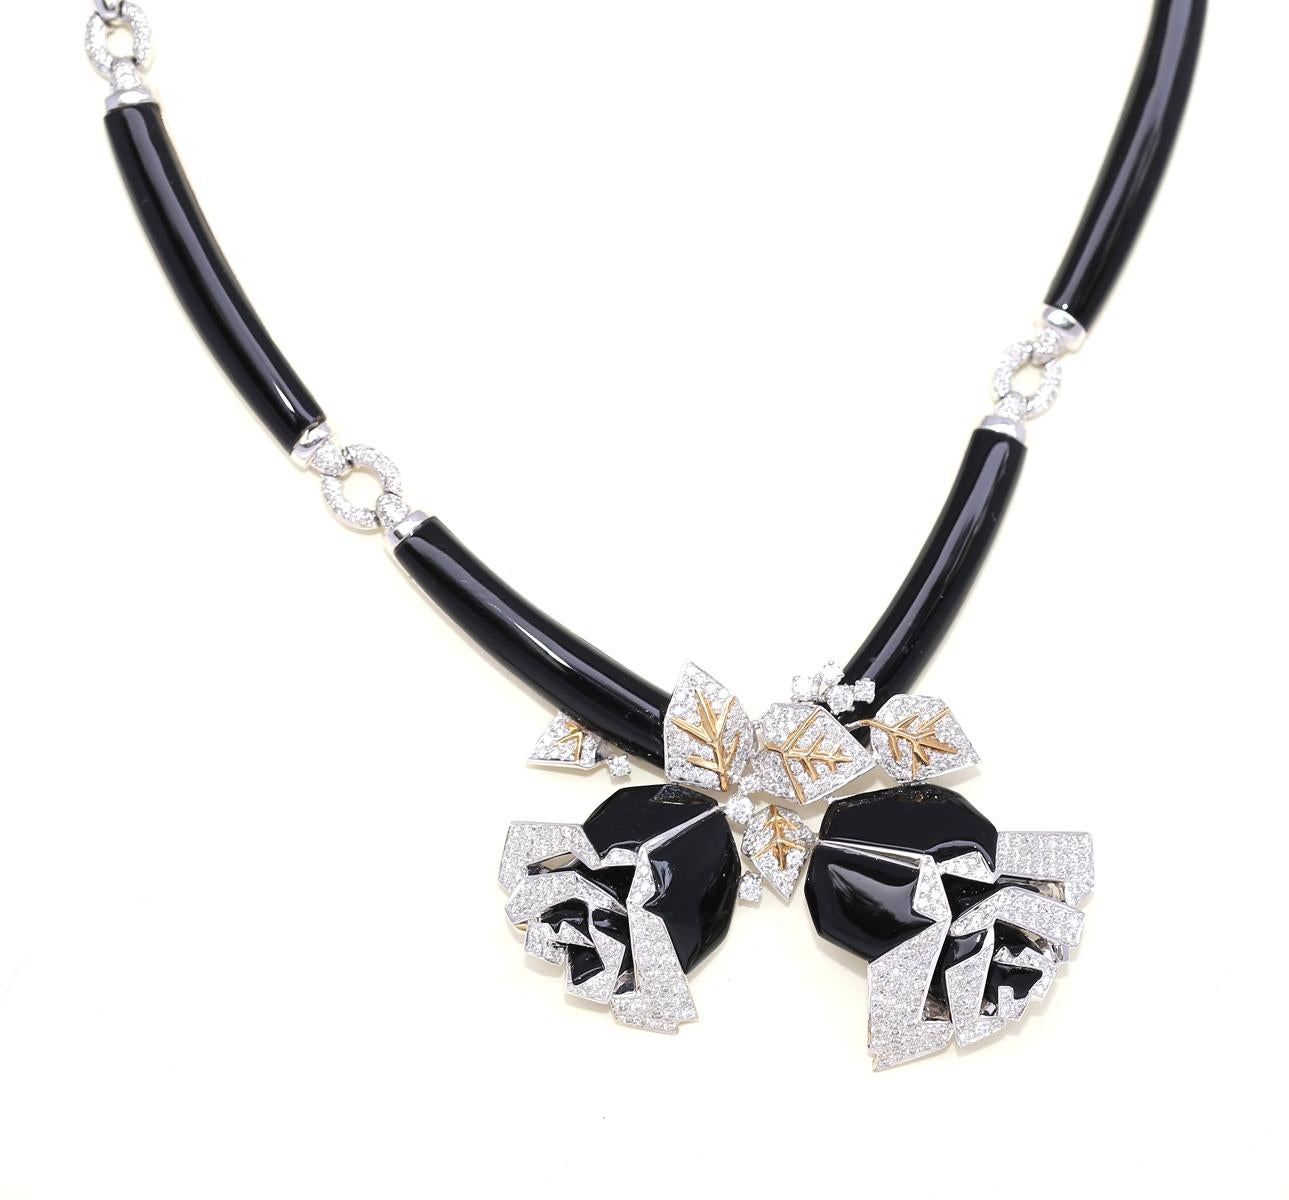 Link Necklace of Onyx on 18K White Gold with wonderfully sculptured black roses also with onyx and Diamonds. 

Stamped 18K 750 Gold.

Necklace sits perfectly on the body. Elegant and super 90es style. Just a perfect gift for the one in the know.